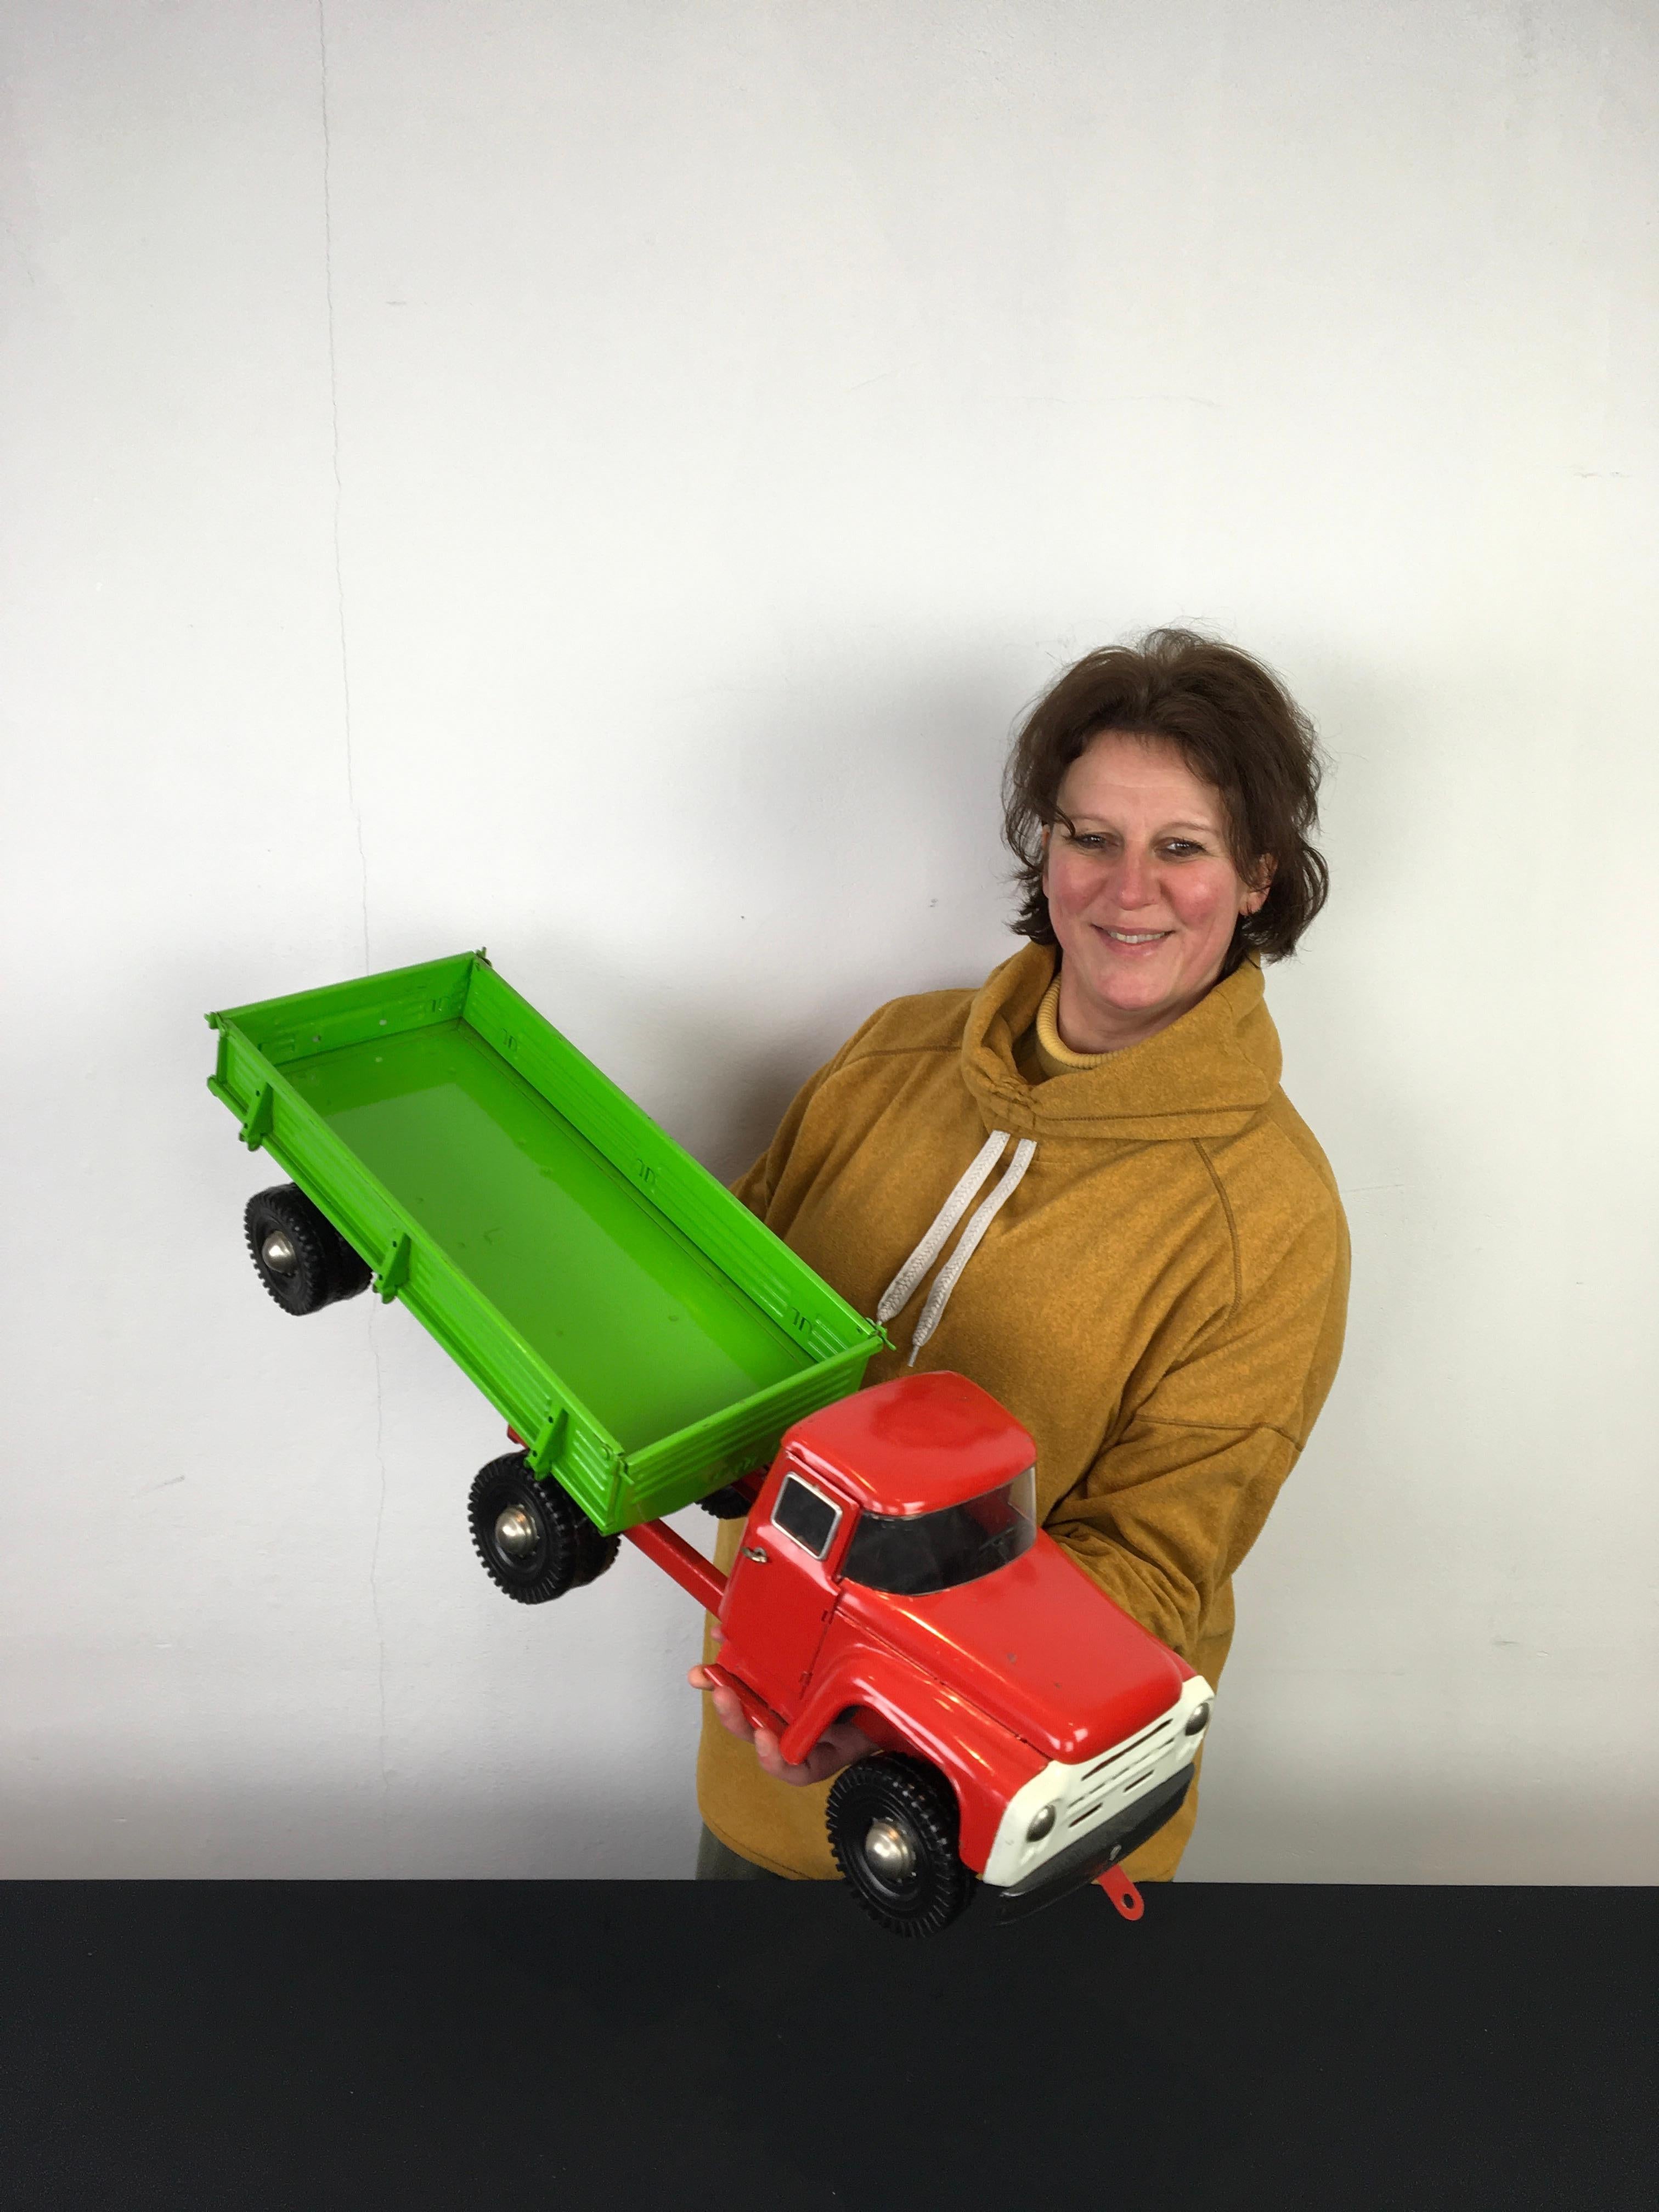 Large Zil semi-trailer truck toy. 
A large vintage metal truck toy with a red cabin and a bright green trailer. The color and painting is still original. Made in Russia in the 1980s, in 1983 which is given on the license plate at the back. 3 flaps